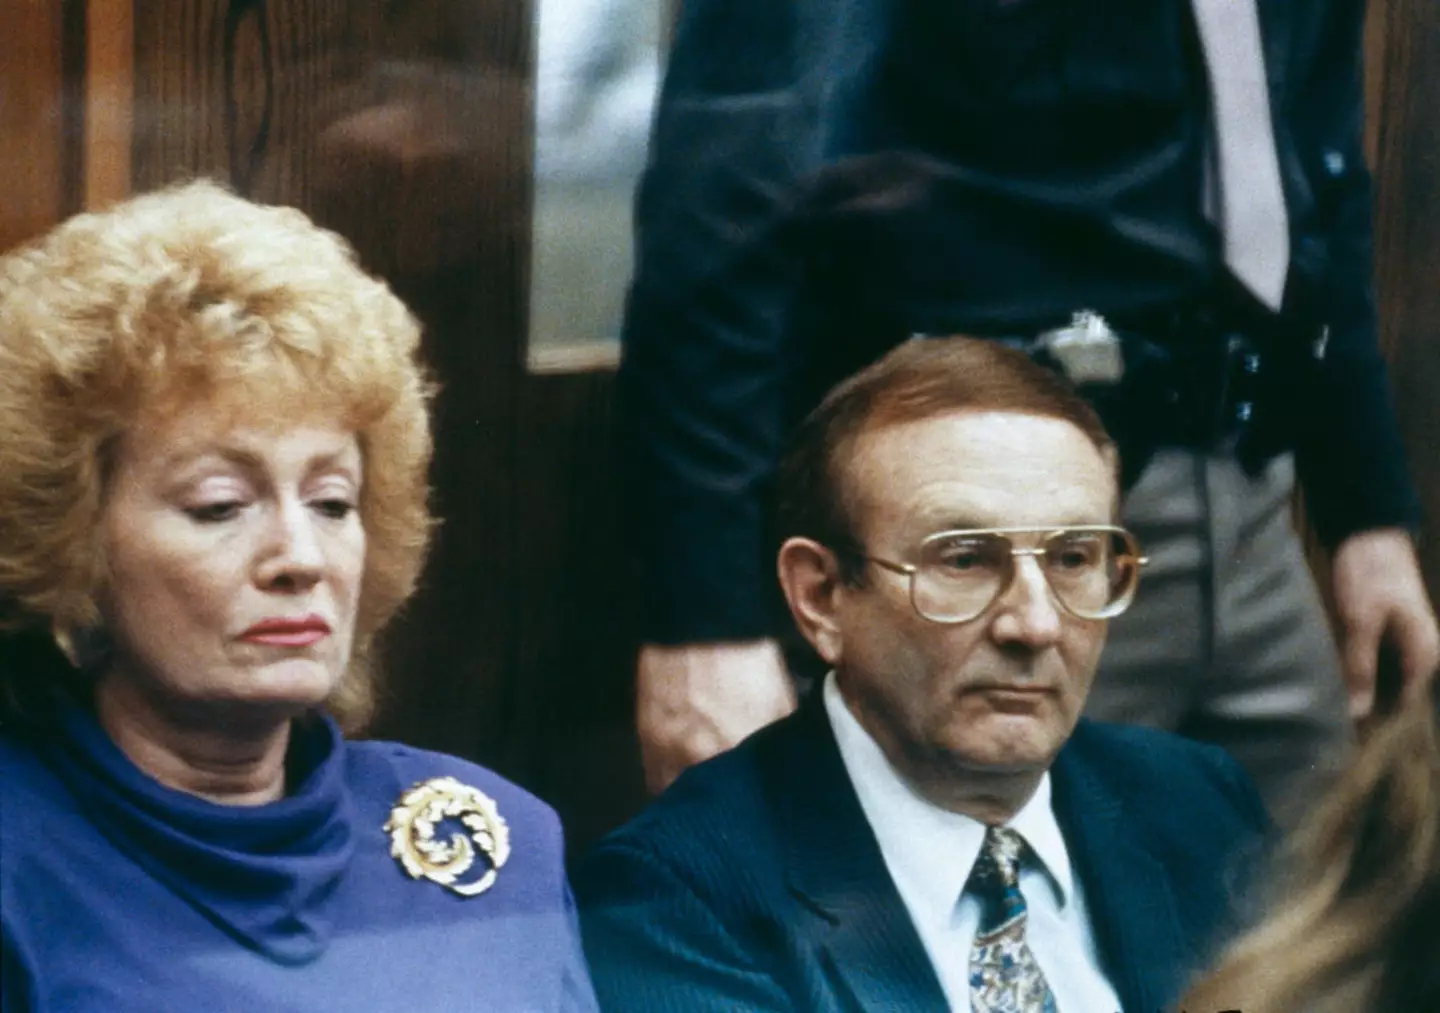 Lionel and Shari Dahmer in court.